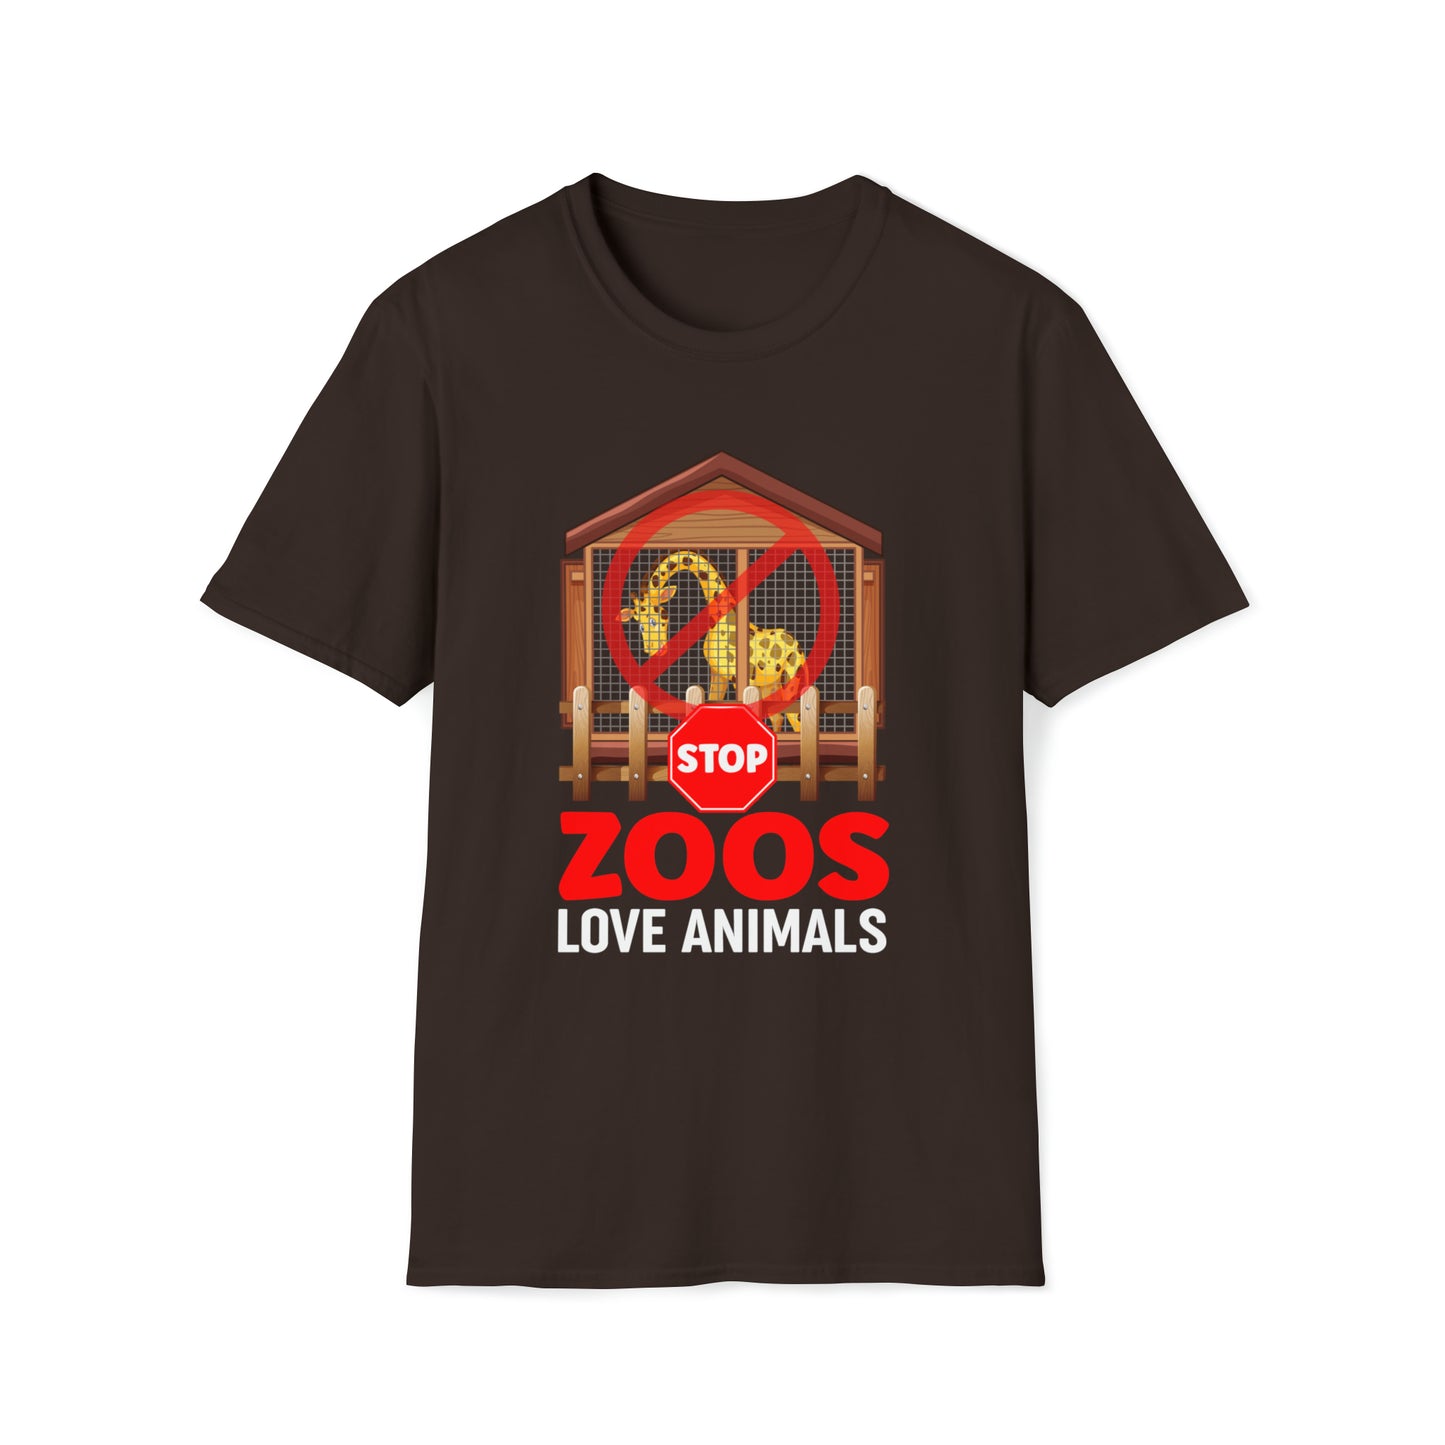 Stop Zoos Love Animals, Unisex Softstyle T-Shirt, Anti Zoo Shirt, Animal Rights Clothing, Mistywilderness